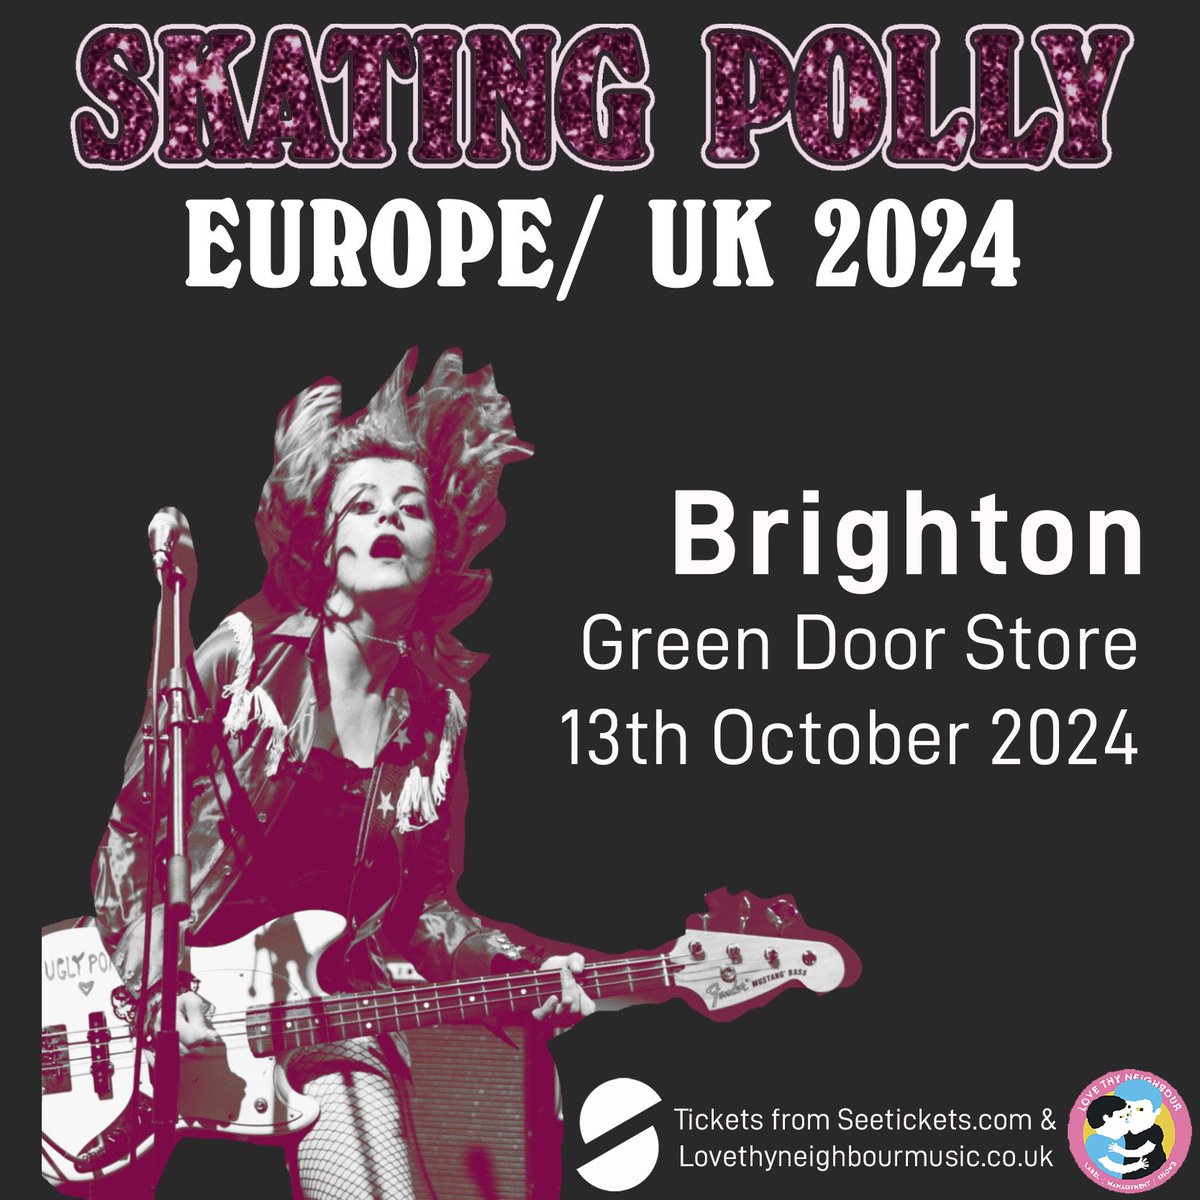 🛼New show!🛼 Oklahoma punks @SkatingPolly bring their chaotic live show back to Brighton! They've toured with Babes in Toyland and collaborated with X’s Exene Cervenka and Beat Happening’s Calvin Johnson, do not miss! 🏛 @greendoorstore 🎫 Onsale now from @seetickets + our site